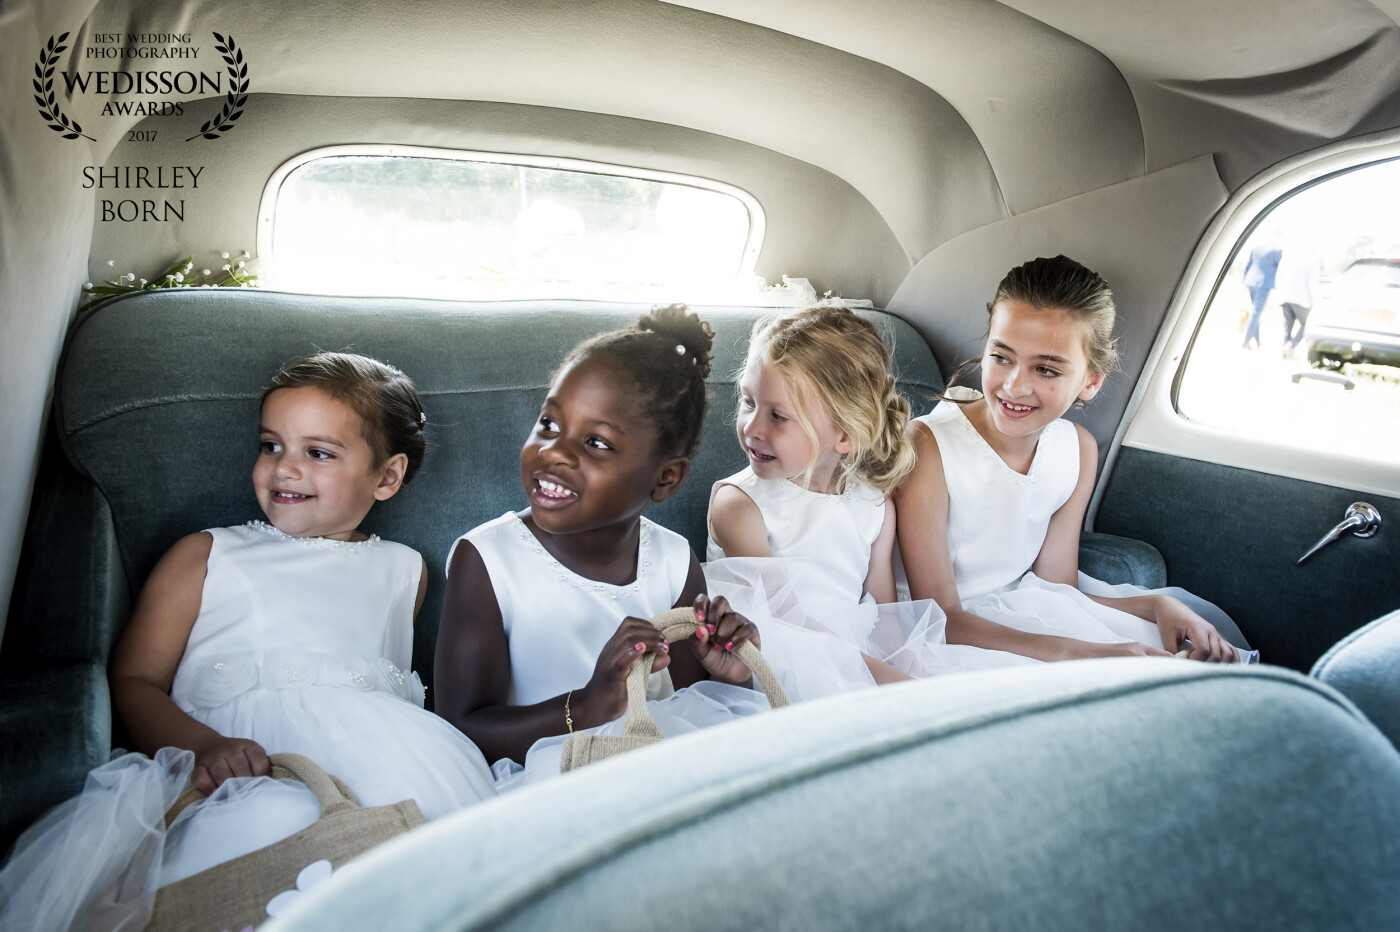 On a very pretty sunny day i took these wedding pictures in Roermond. The bride and groom are getting in the car an the children are waiting for them in the back of the old car.